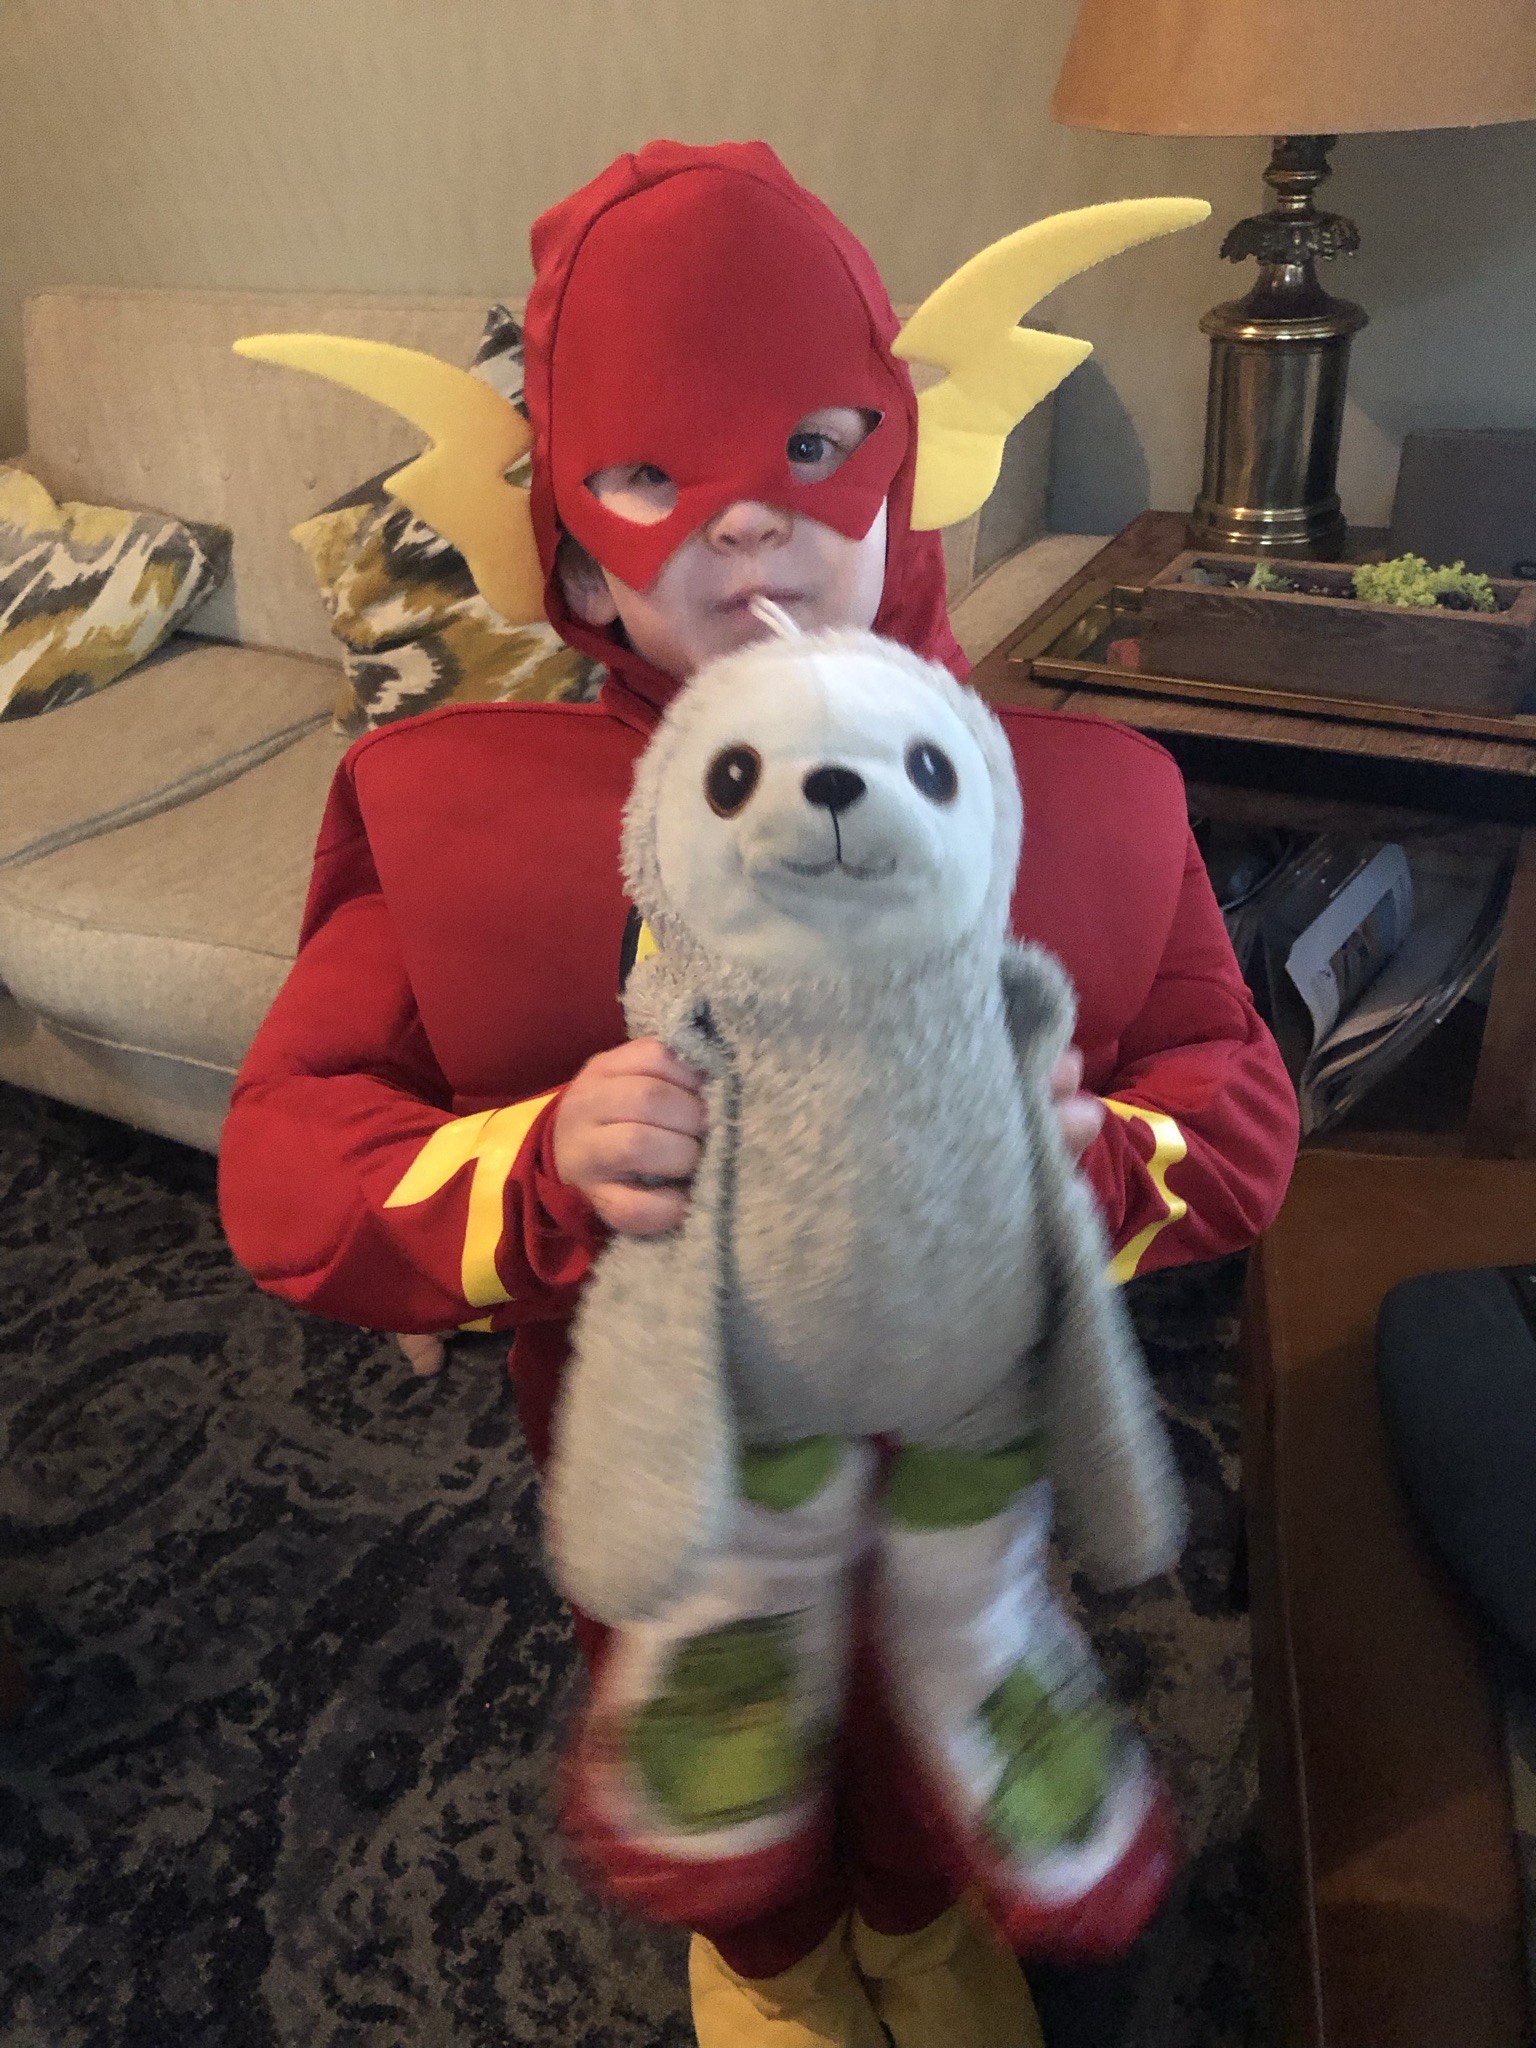 A child in a red superhero costume with a mask and flash-like emblems holds a stuffed sloth toy.